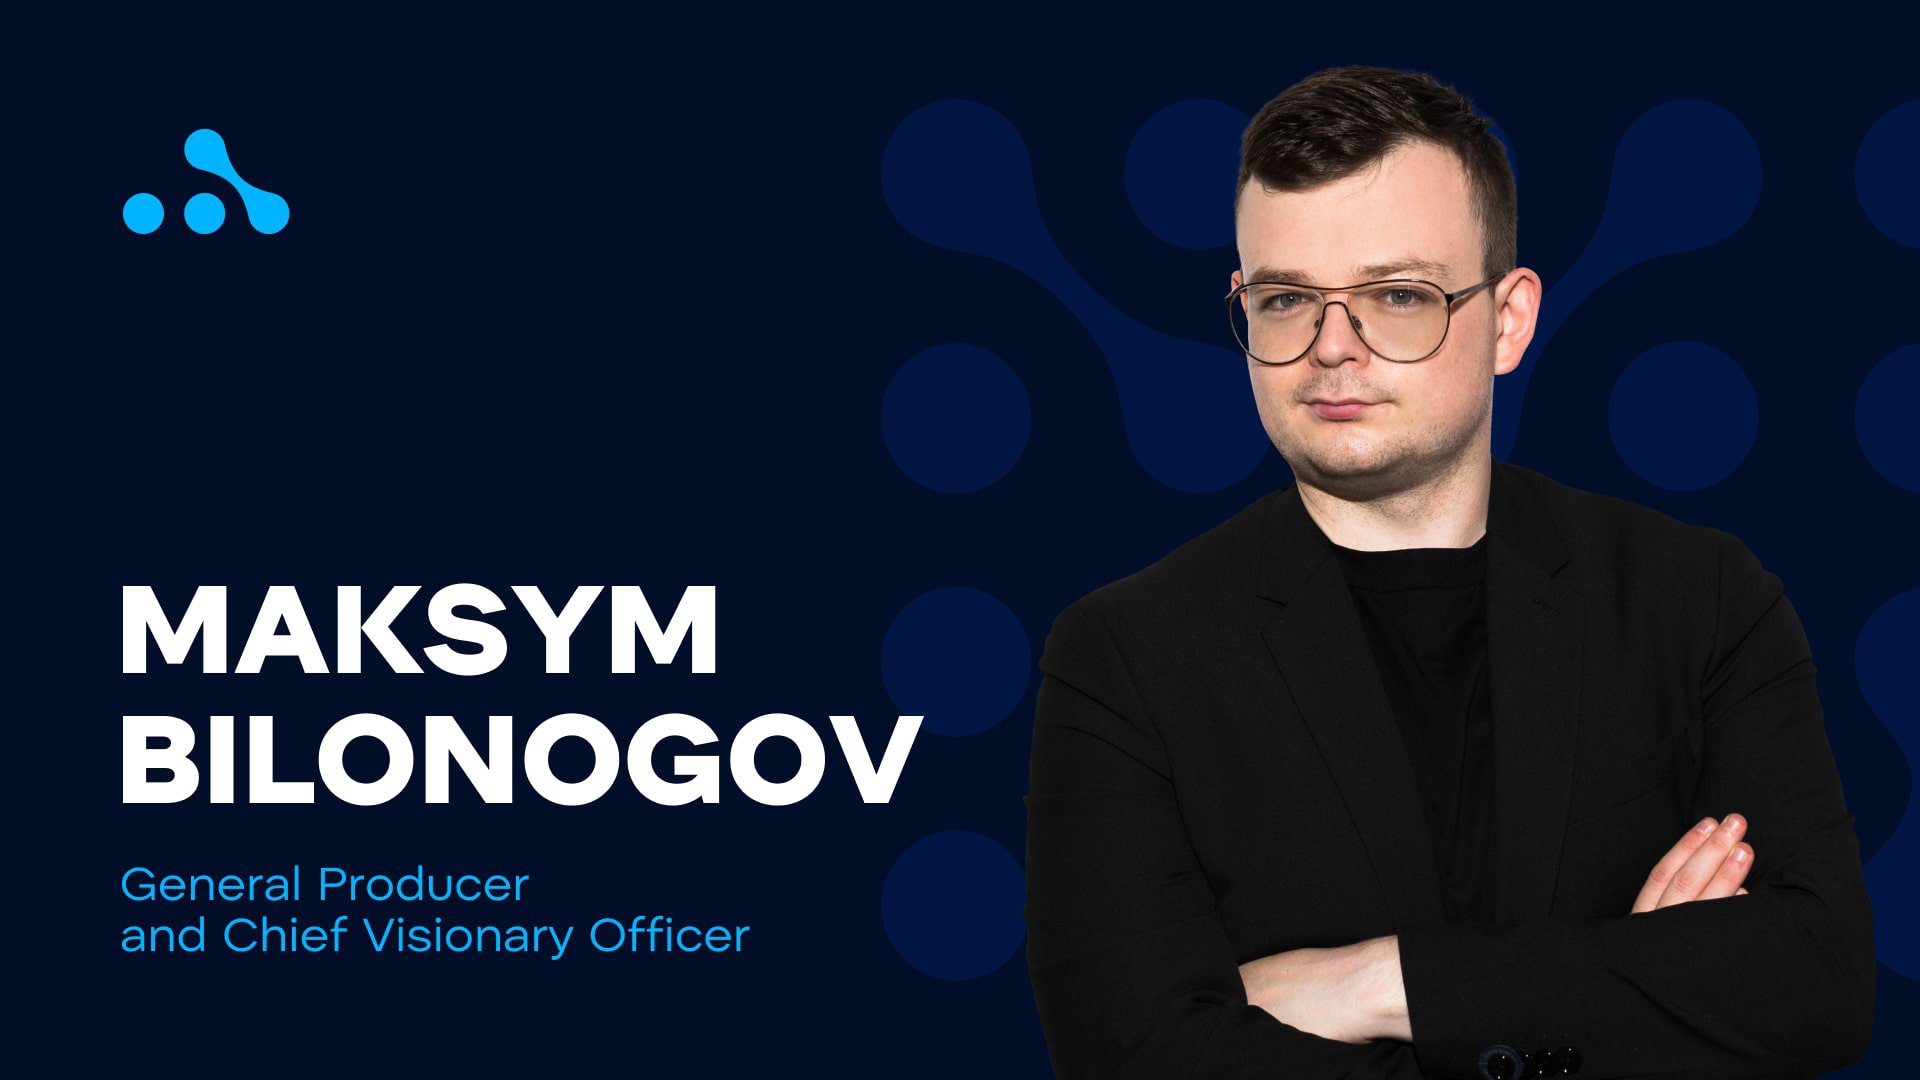 Maksym Bilonogov, chief visionary officer and general producer at WePlay Esports